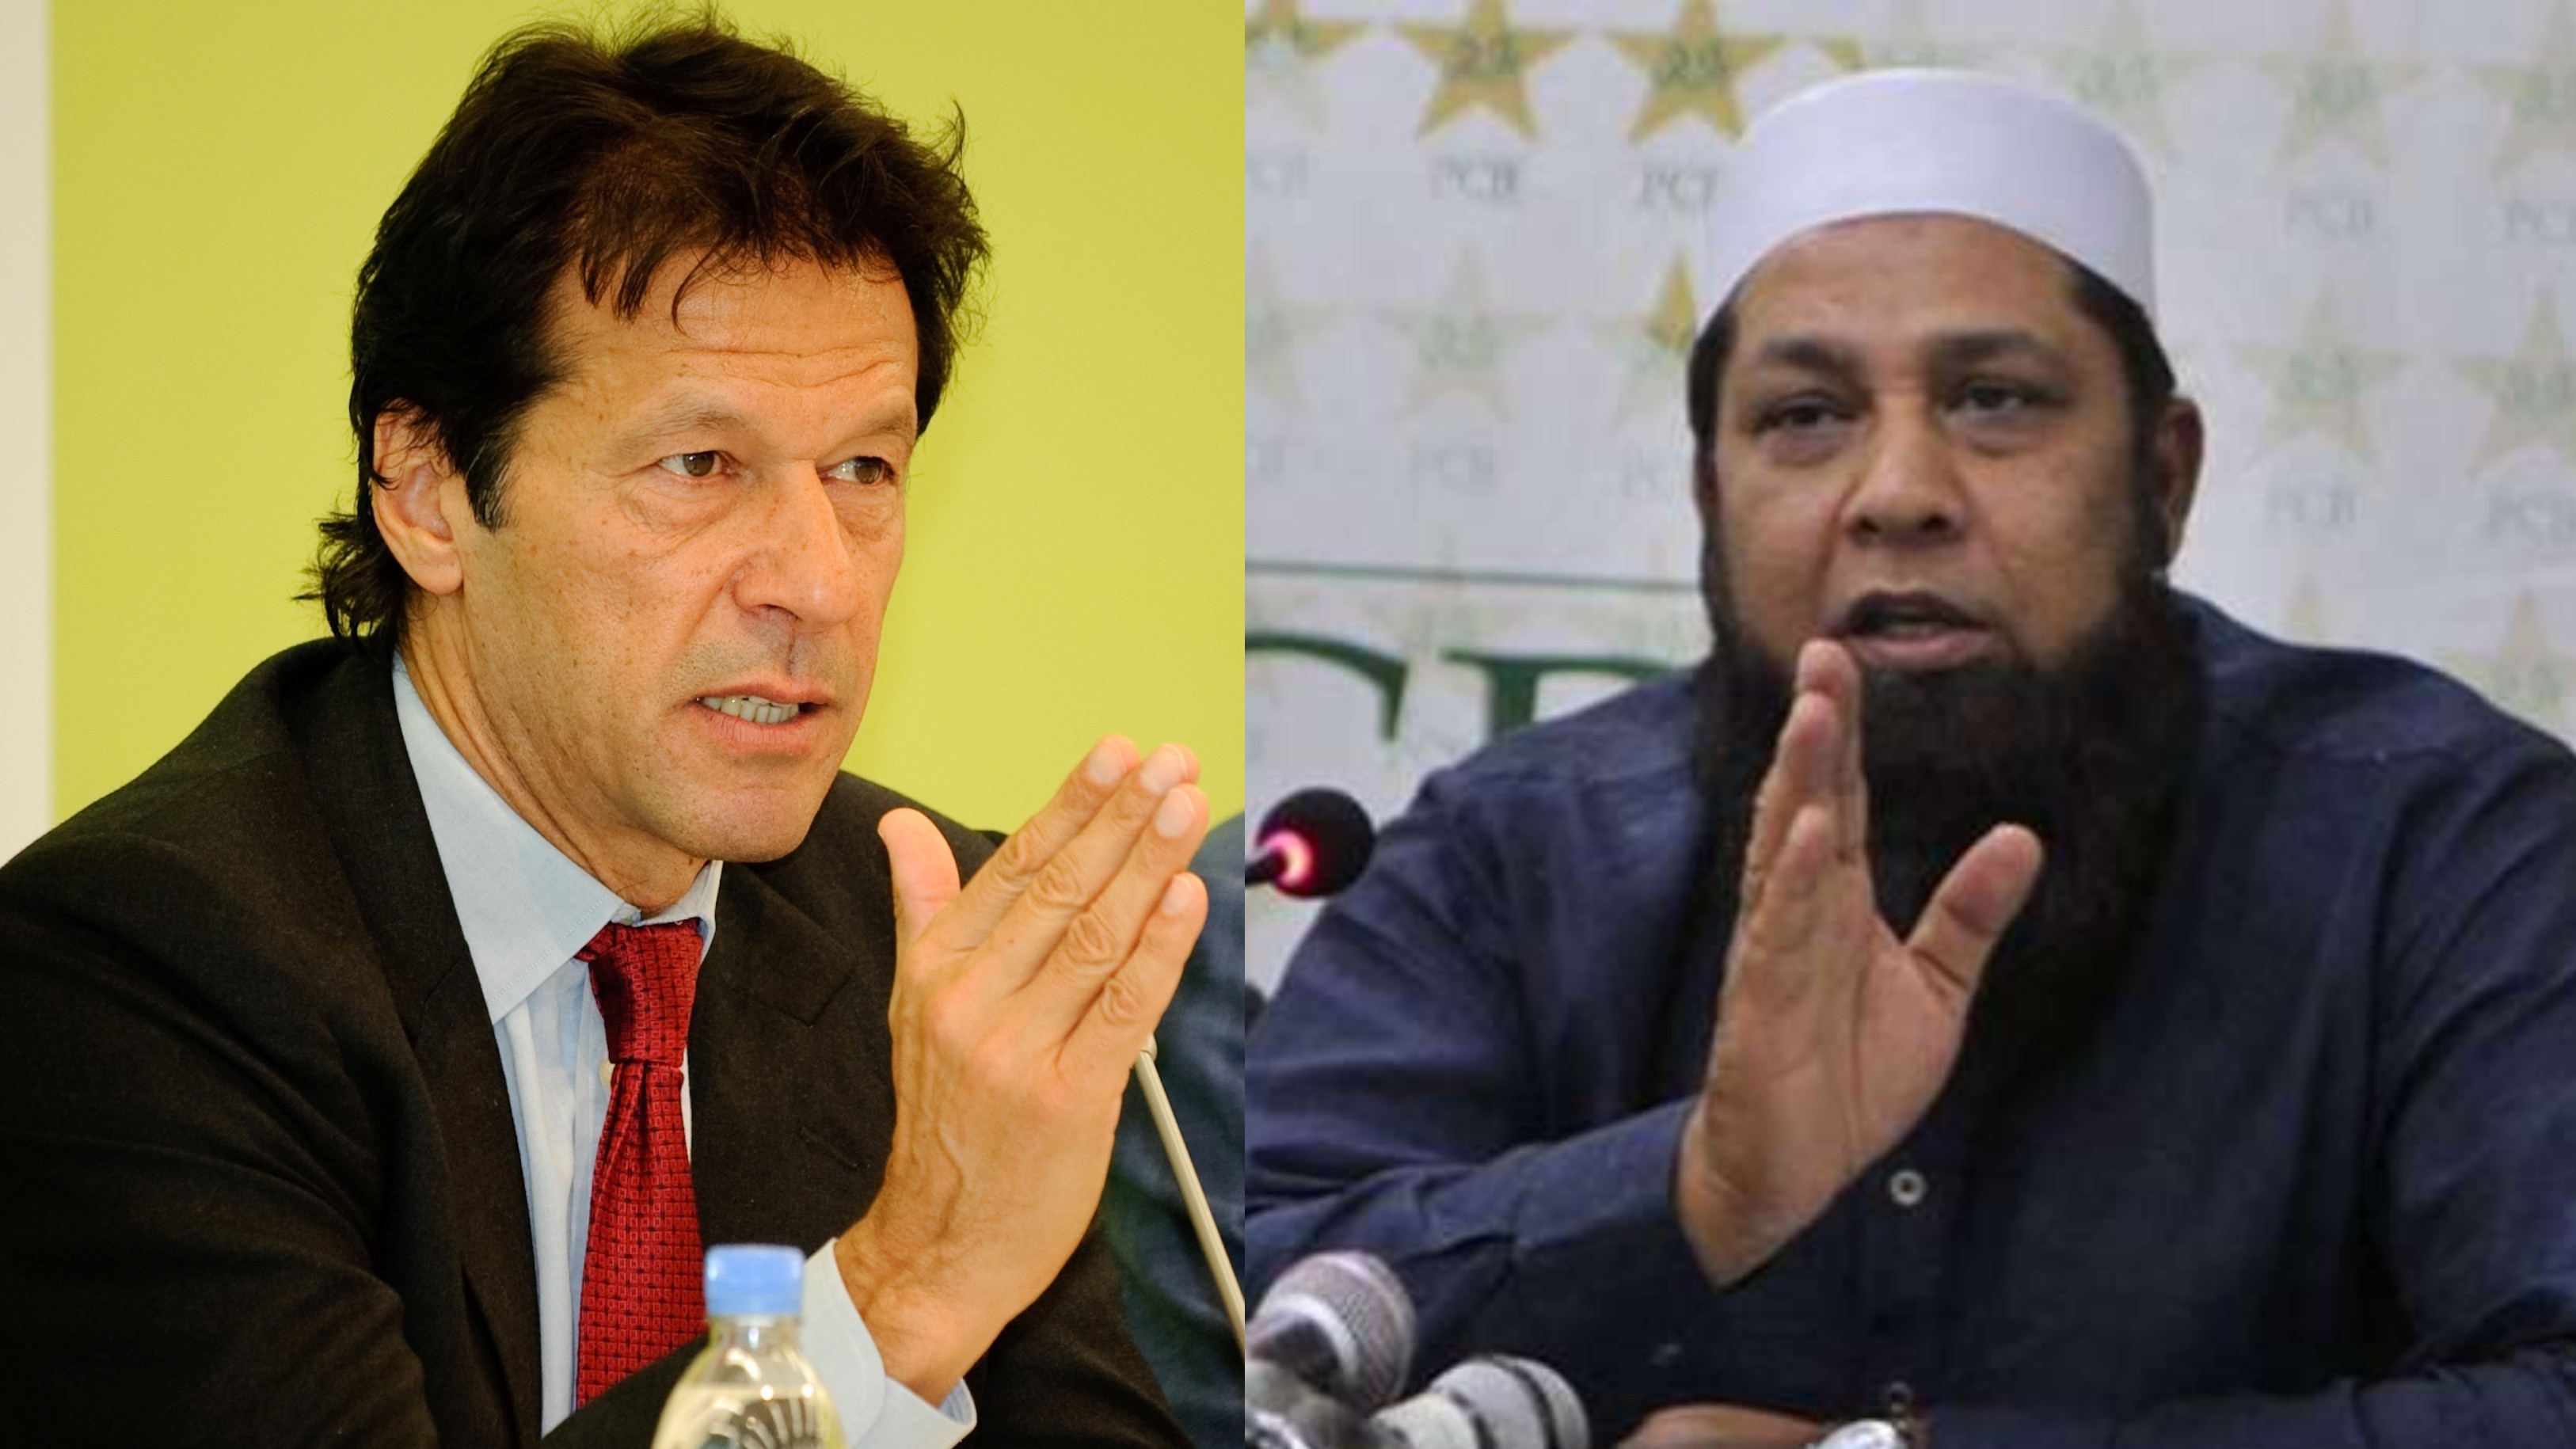 Inzamam-ul-Haq explains why Imran Khan was such a great captain